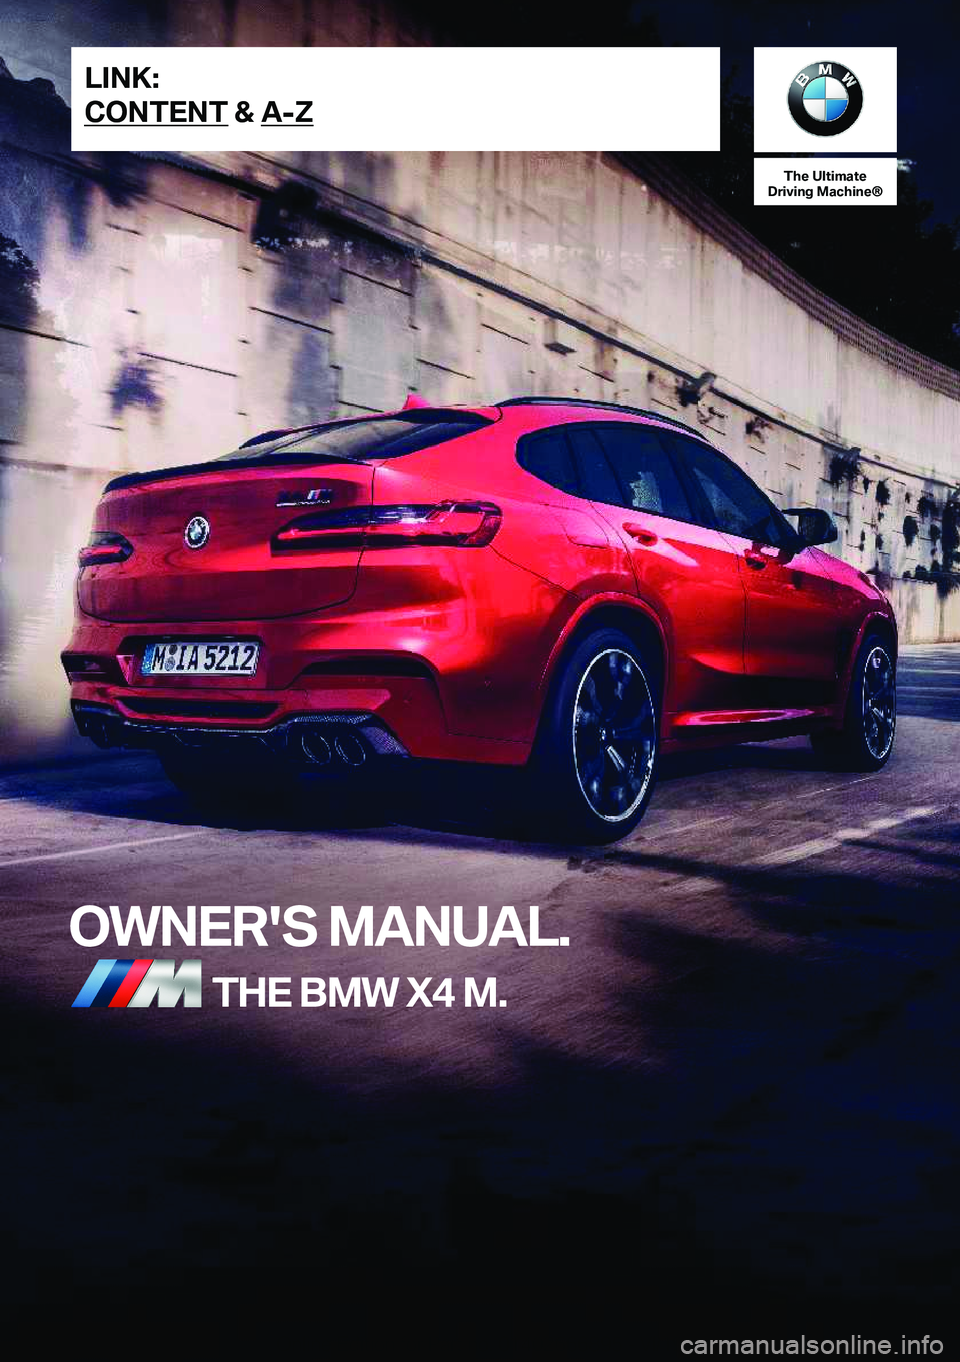 BMW X4 M 2020  Owners Manual �T�h�e��U�l�t�i�m�a�t�e
�D�r�i�v�i�n�g��M�a�c�h�i�n�e�n
�O�W�N�E�R�'�S��M�A�N�U�A�L�.�T�H�E��B�M�W��X�4��M�.�L�I�N�K�:
�C�O�N�T�E�N�T��&��A�-�Z�O�n�l�i�n�e��E�d�i�t�i�o�n��f�o�r��P�a�r�